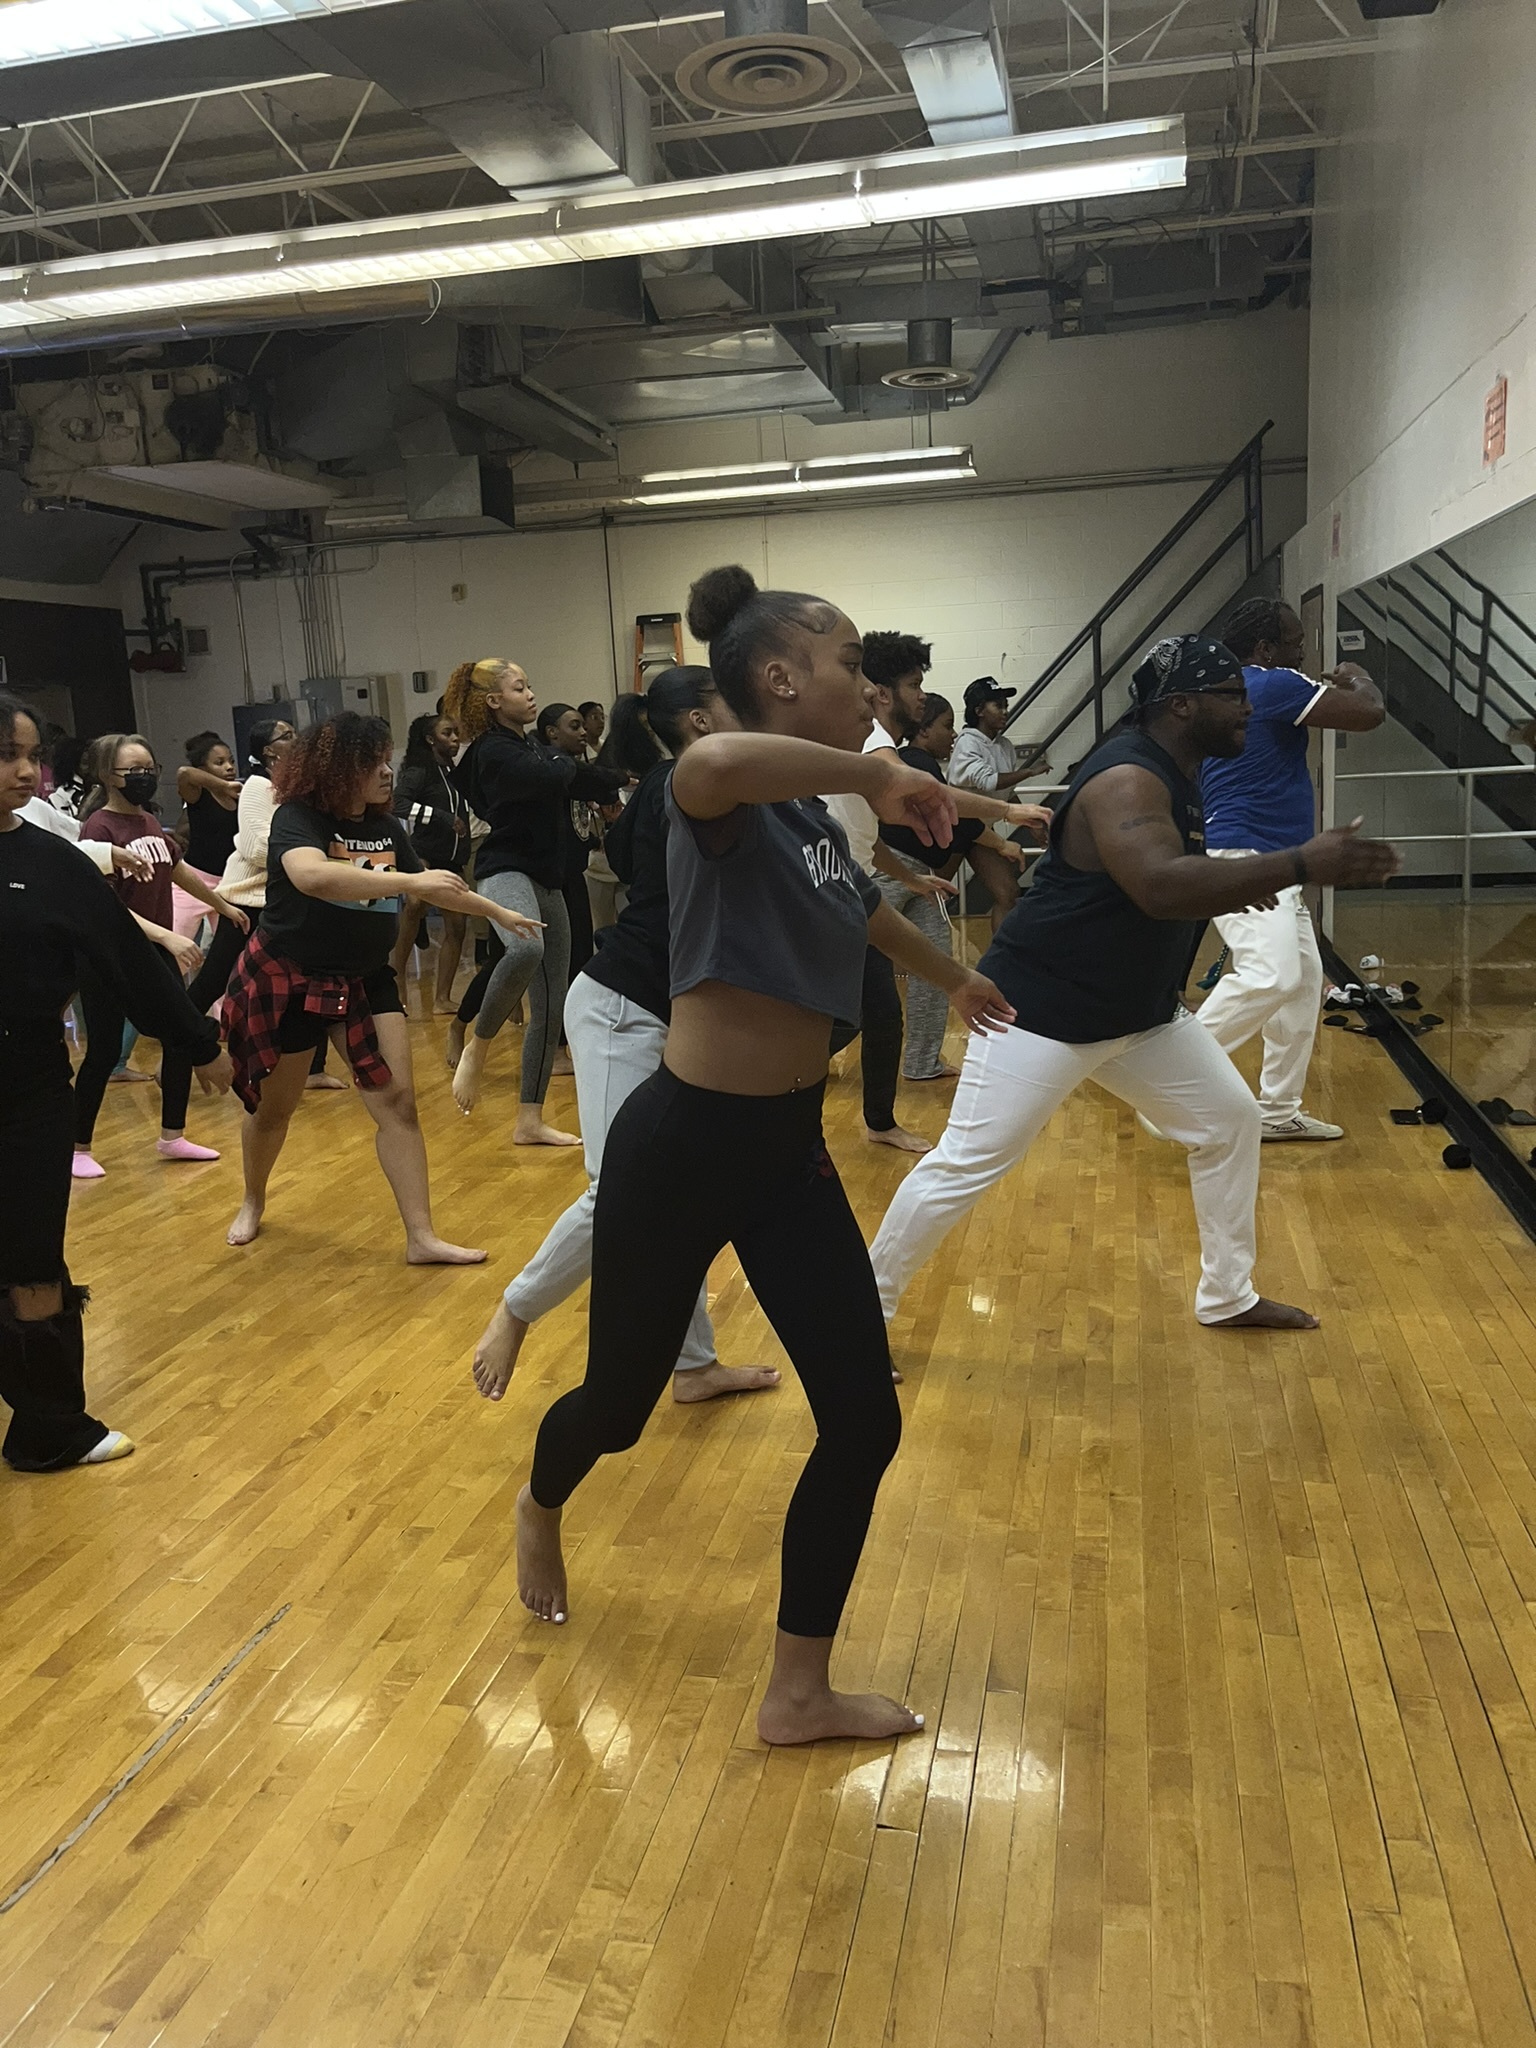 Capoeira Martial Arts visits with Dance Students